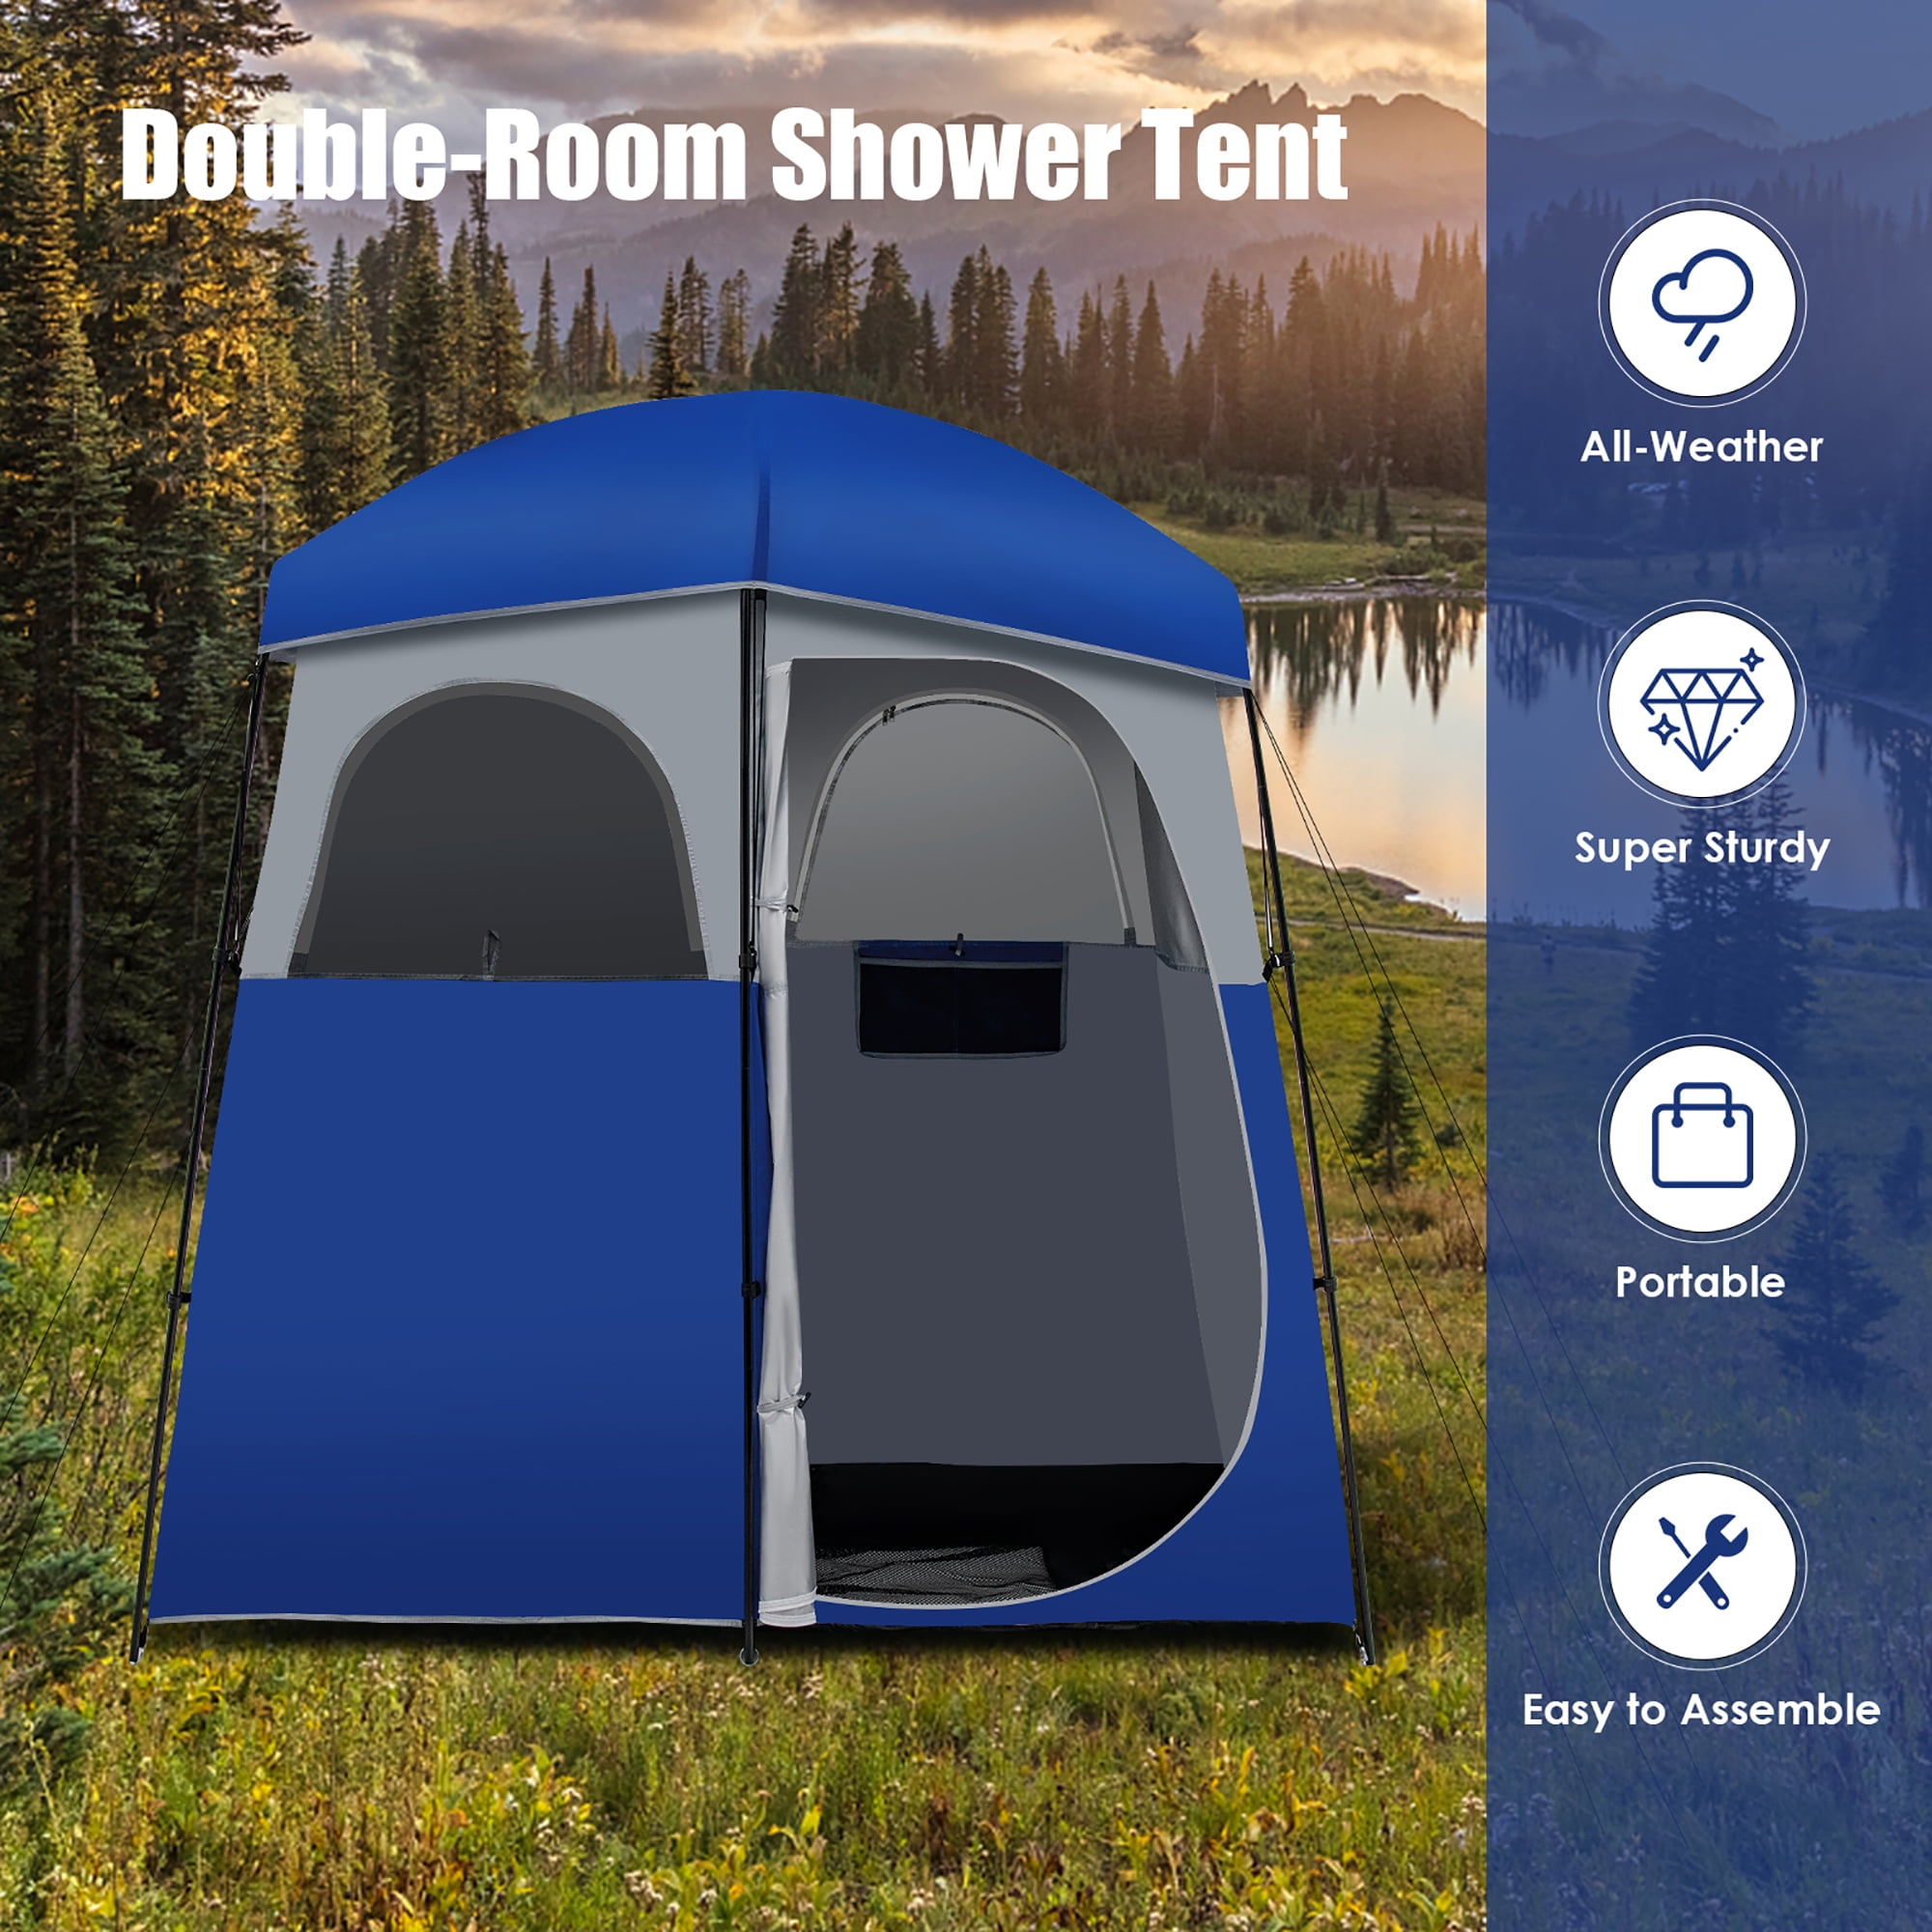 Costway Double-Room Camping Shower Toilet Tent with Floor Oversize Portable  Storage Bag 